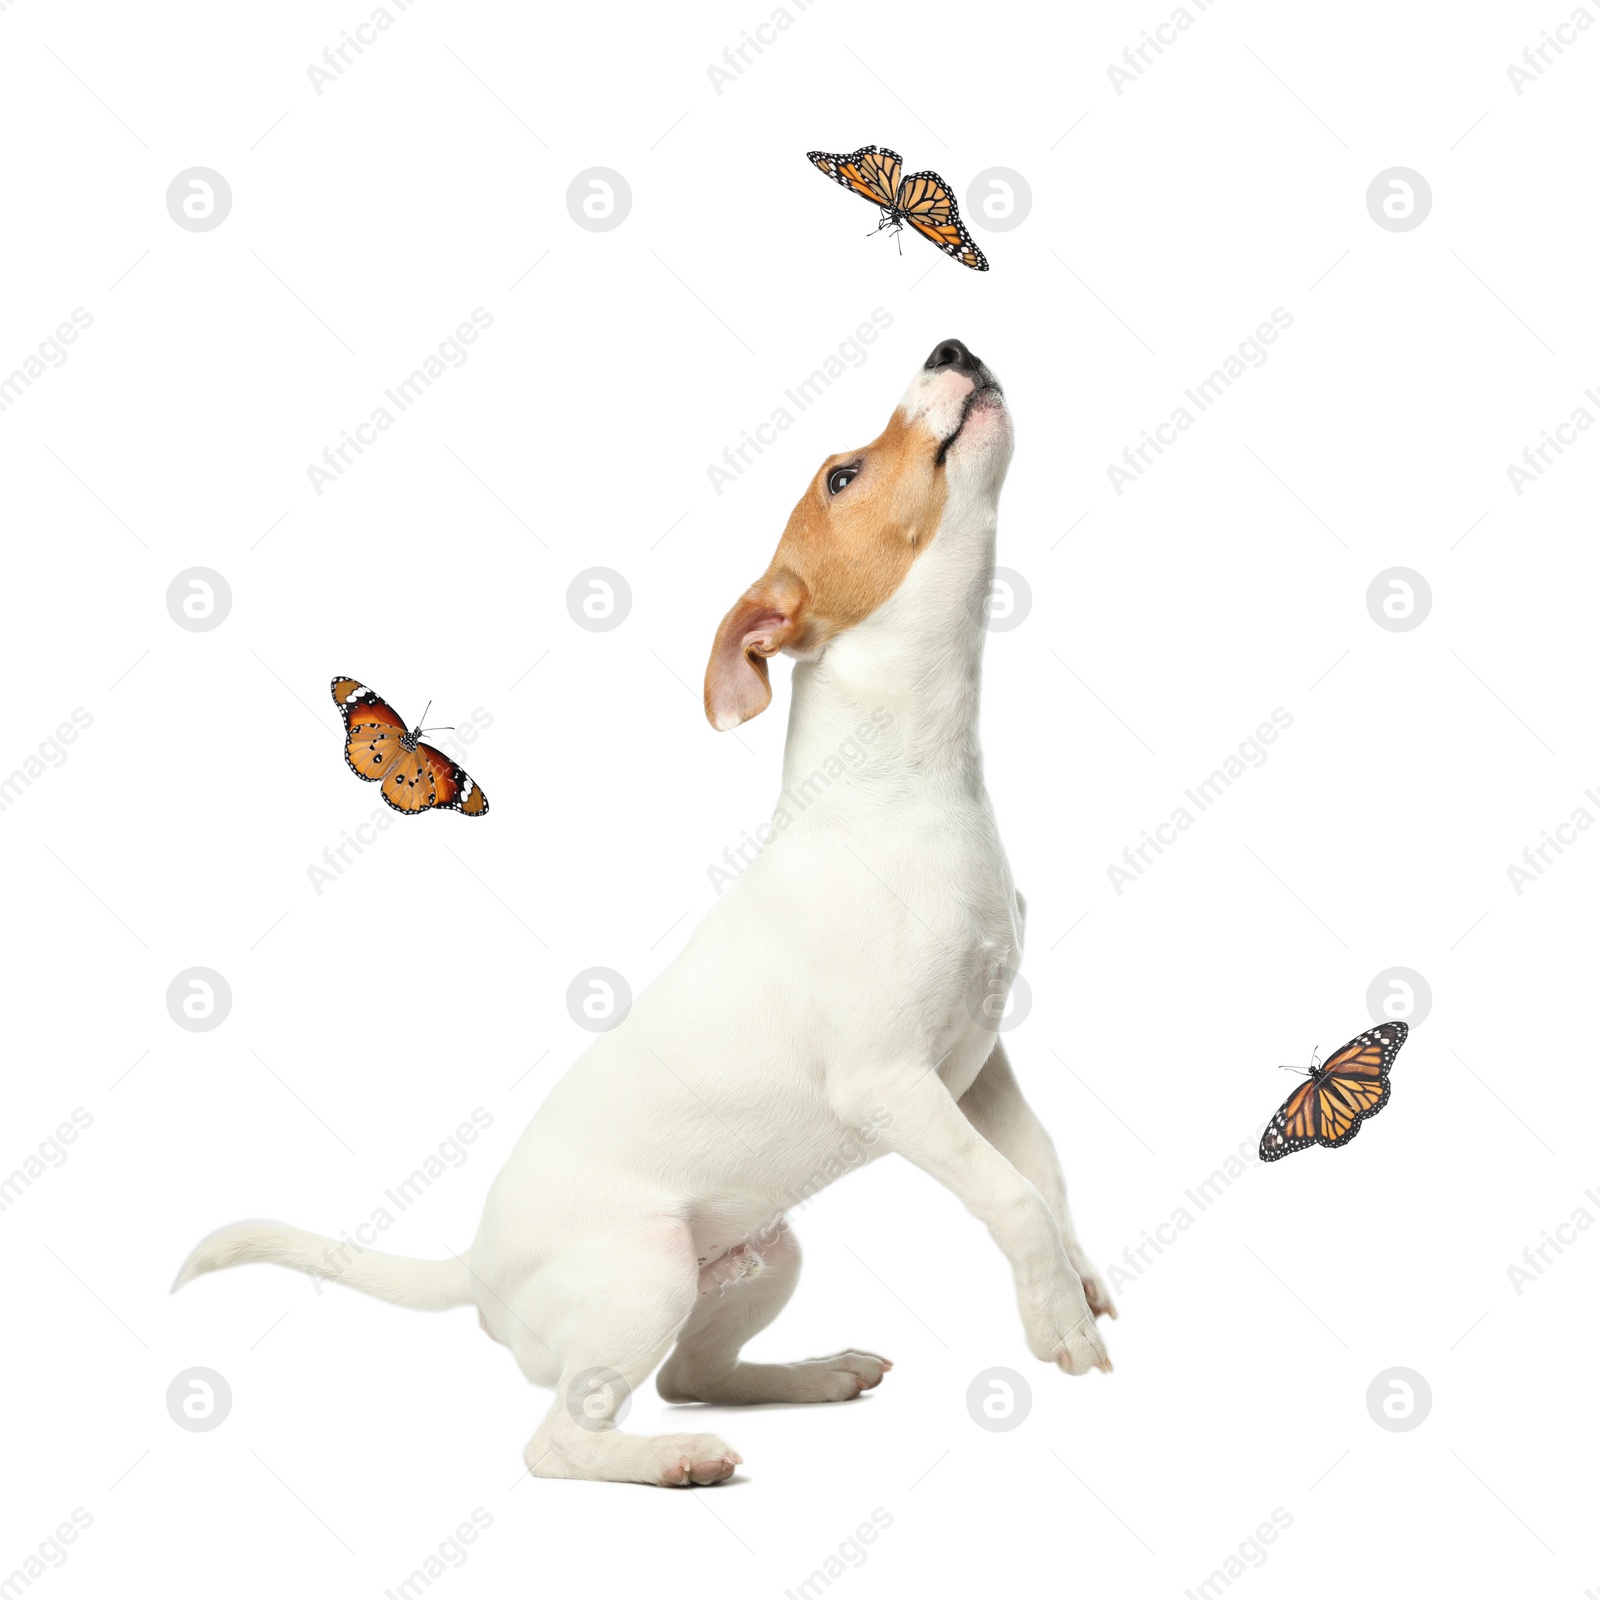 Image of Cute Jack Russel Terrier playing with butterflies on white background. Lovely dog